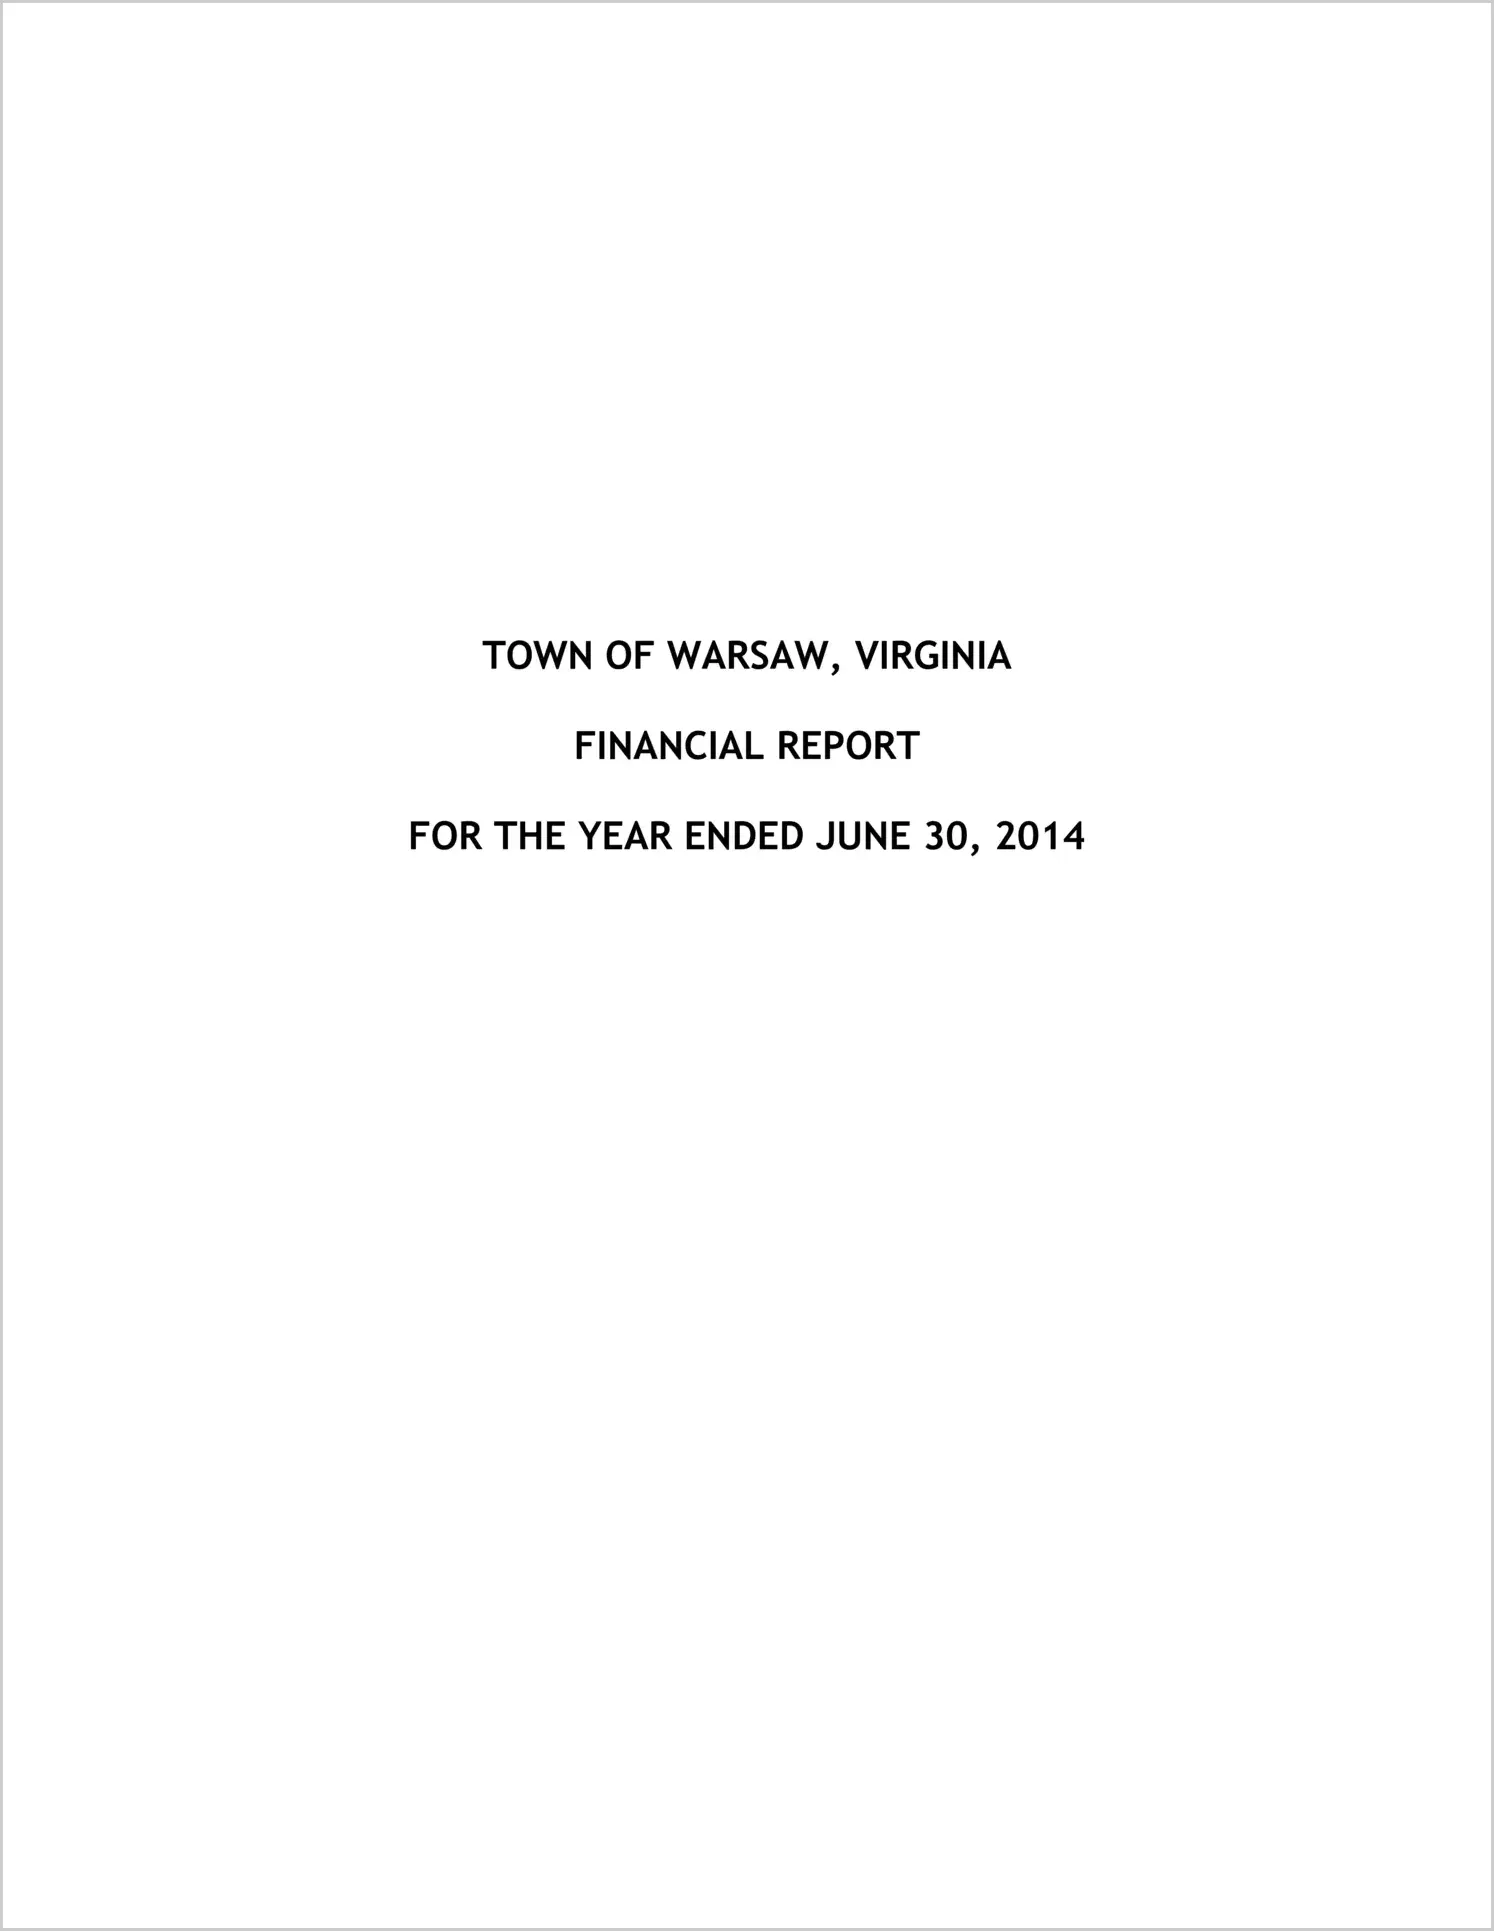 2014 Annual Financial Report for Town of Warsaw